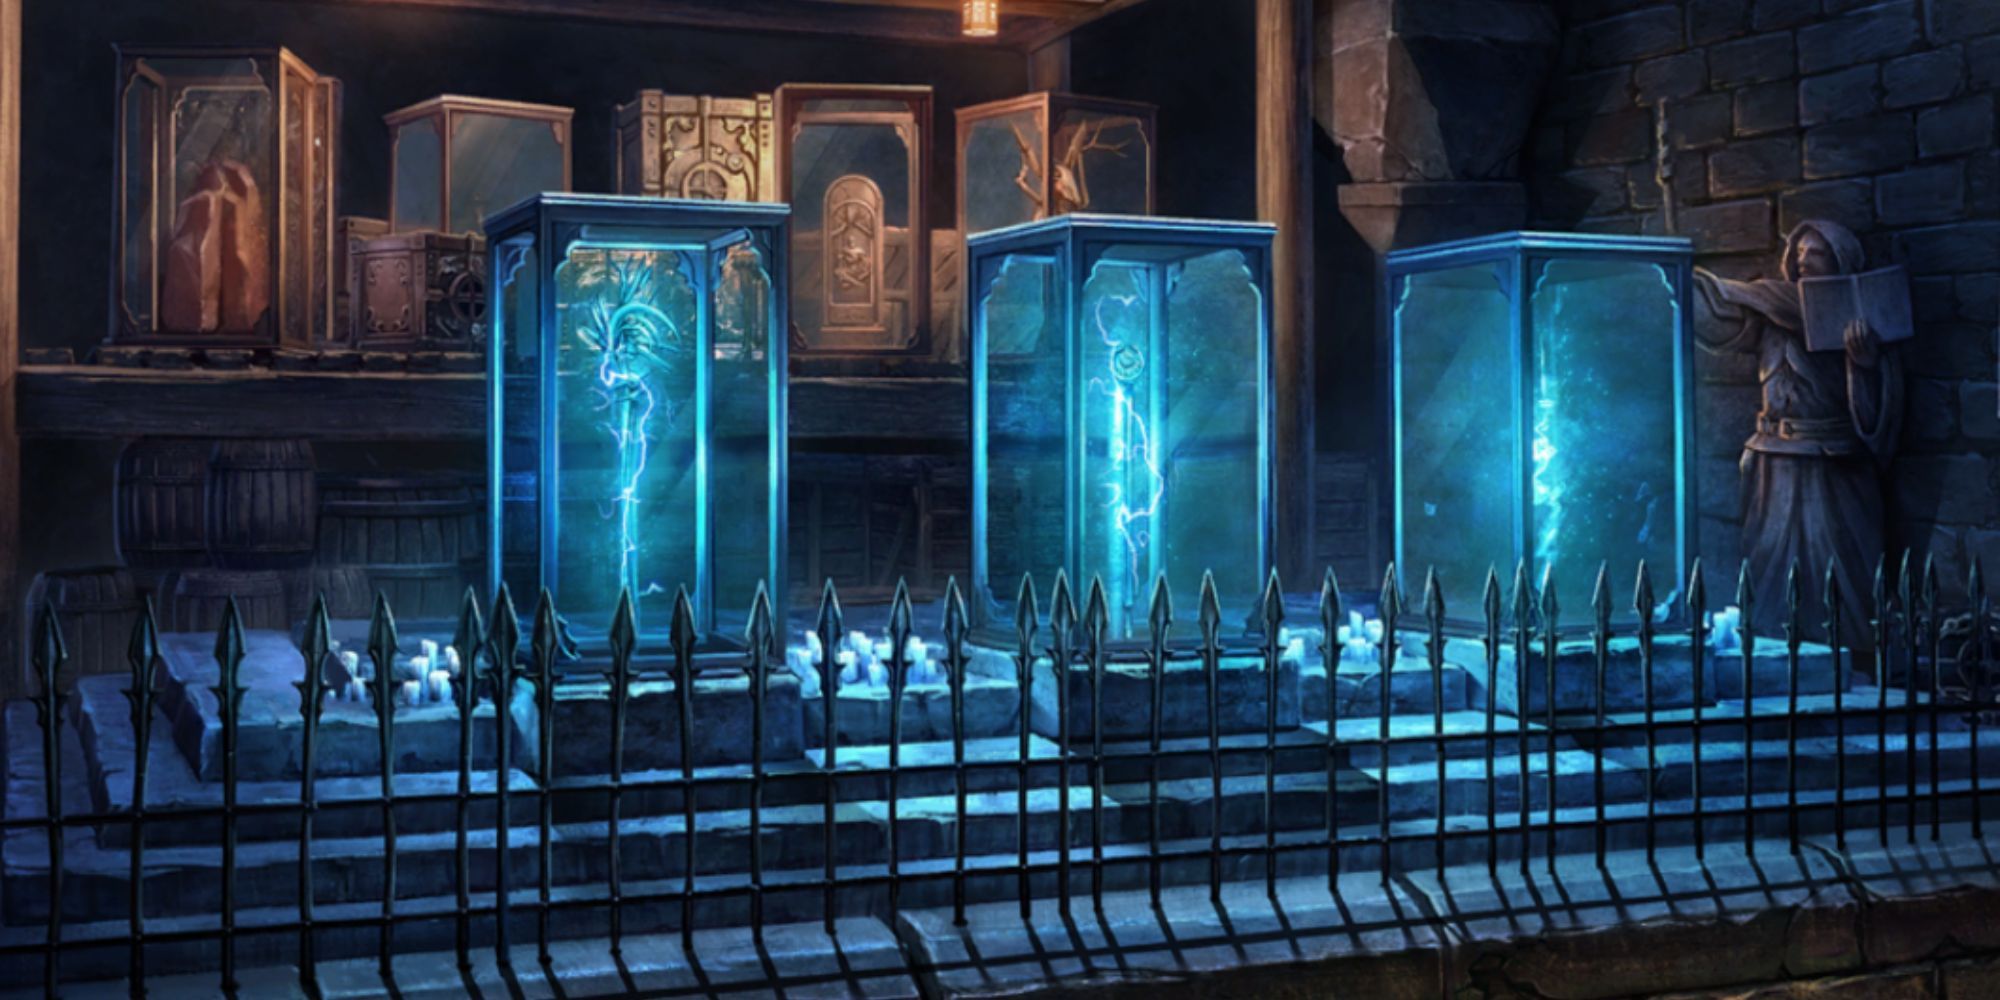 ESO Red Petal Bastion Display Cases Glowing Blue